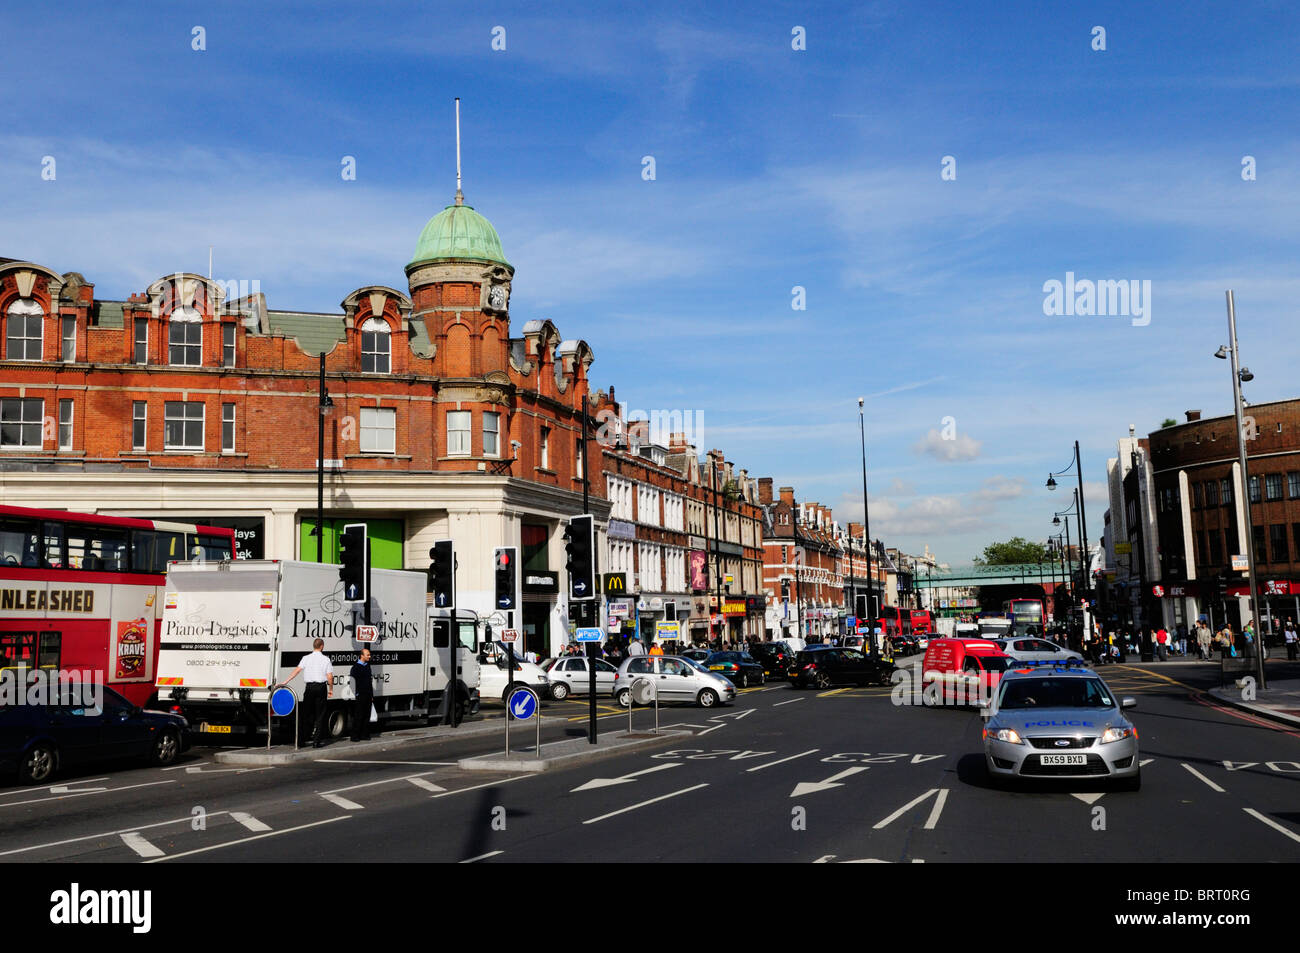 A Police car in Brixton Road, London, Engand, UK Stock Photo